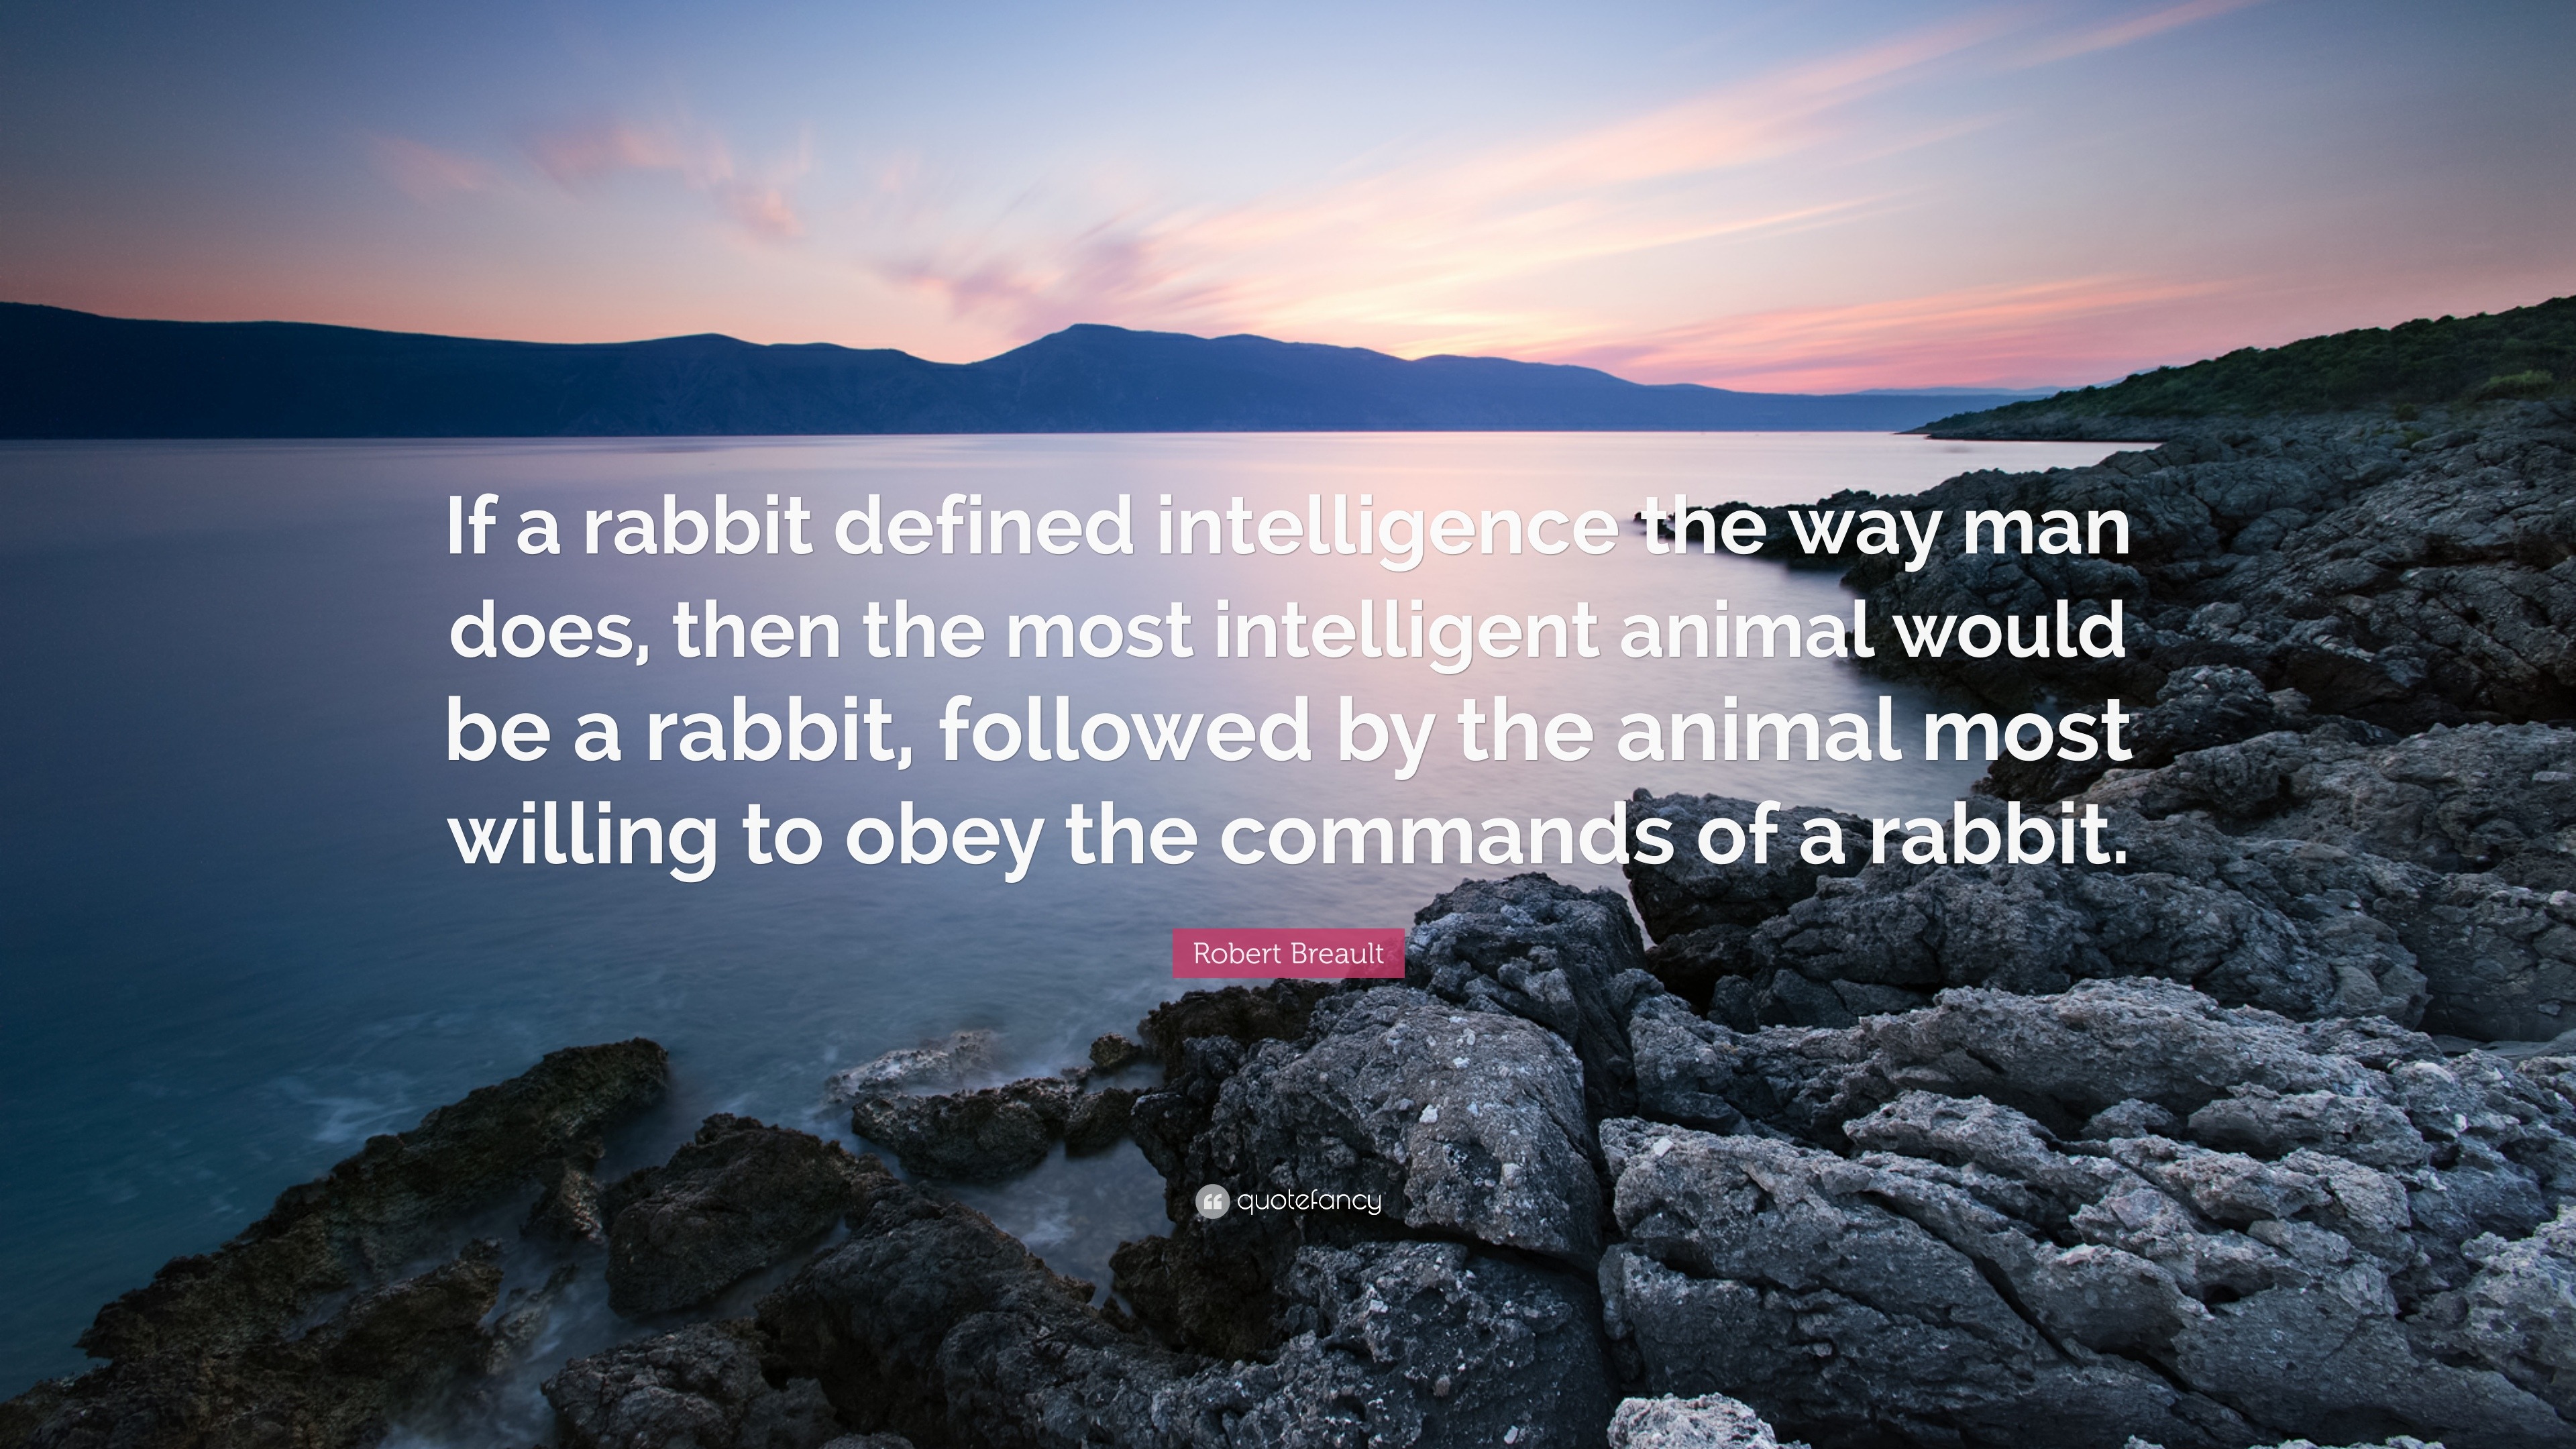 Robert Breault Quote: “If a rabbit defined intelligence the way man does,  then the most intelligent animal would be a rabbit, followed by the a...”